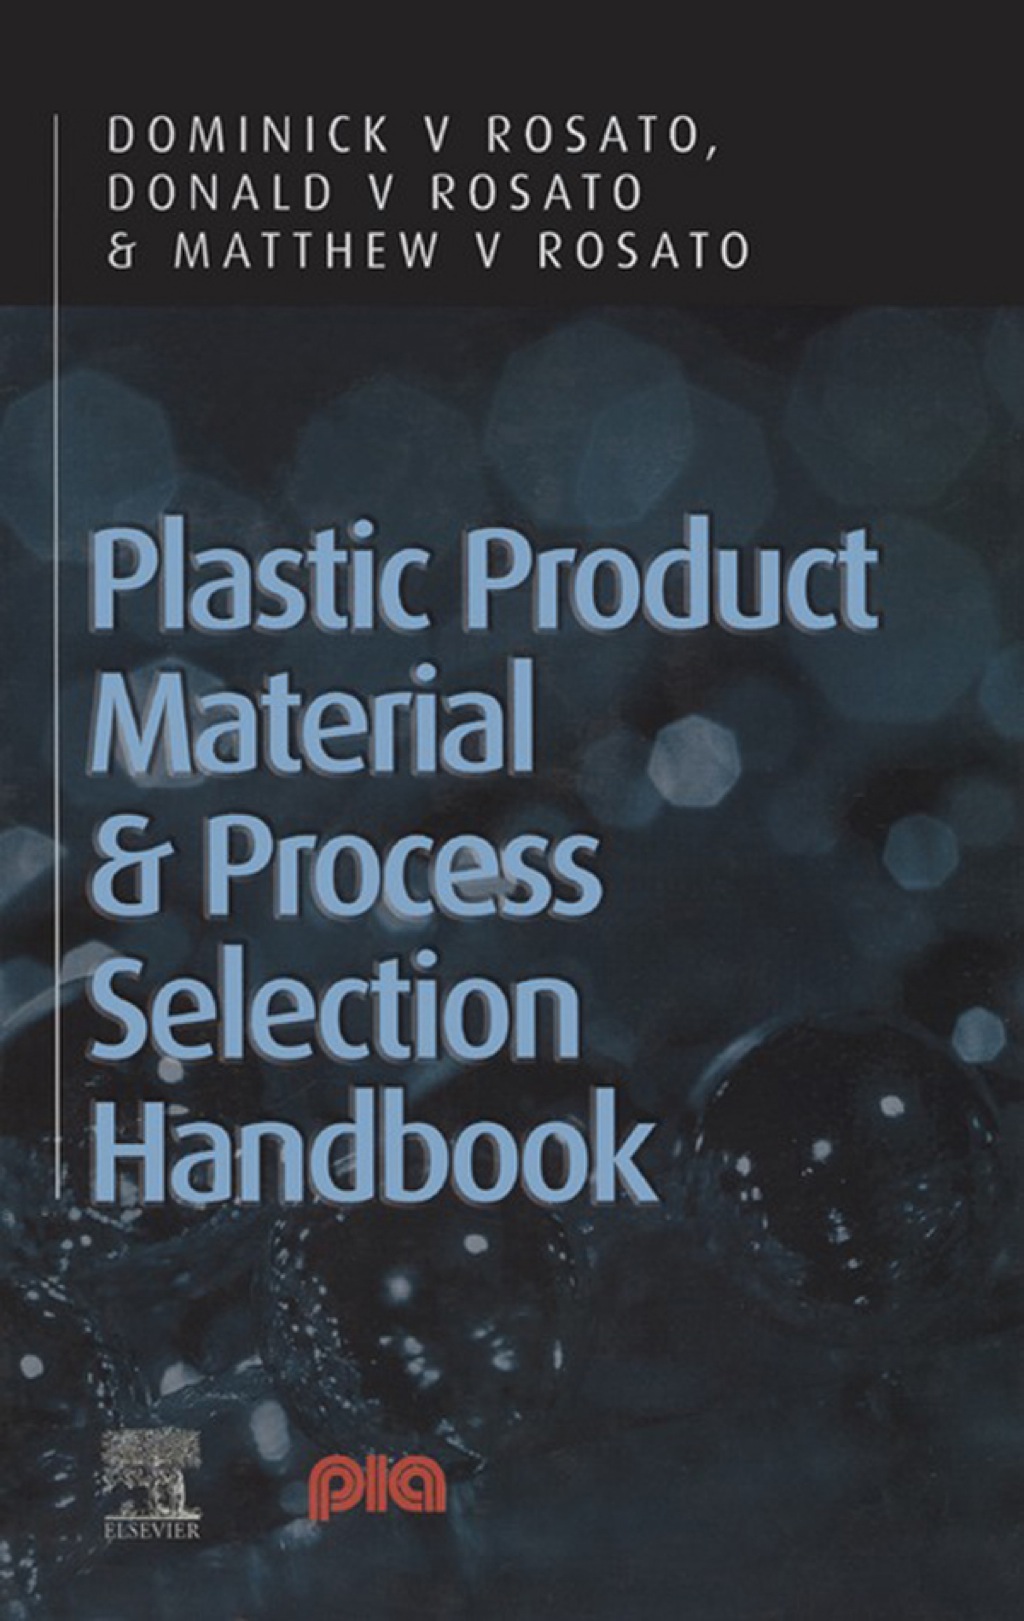 Plastic Product Material and Process Selection Handbook (eBook) - Dominick V Rosato,